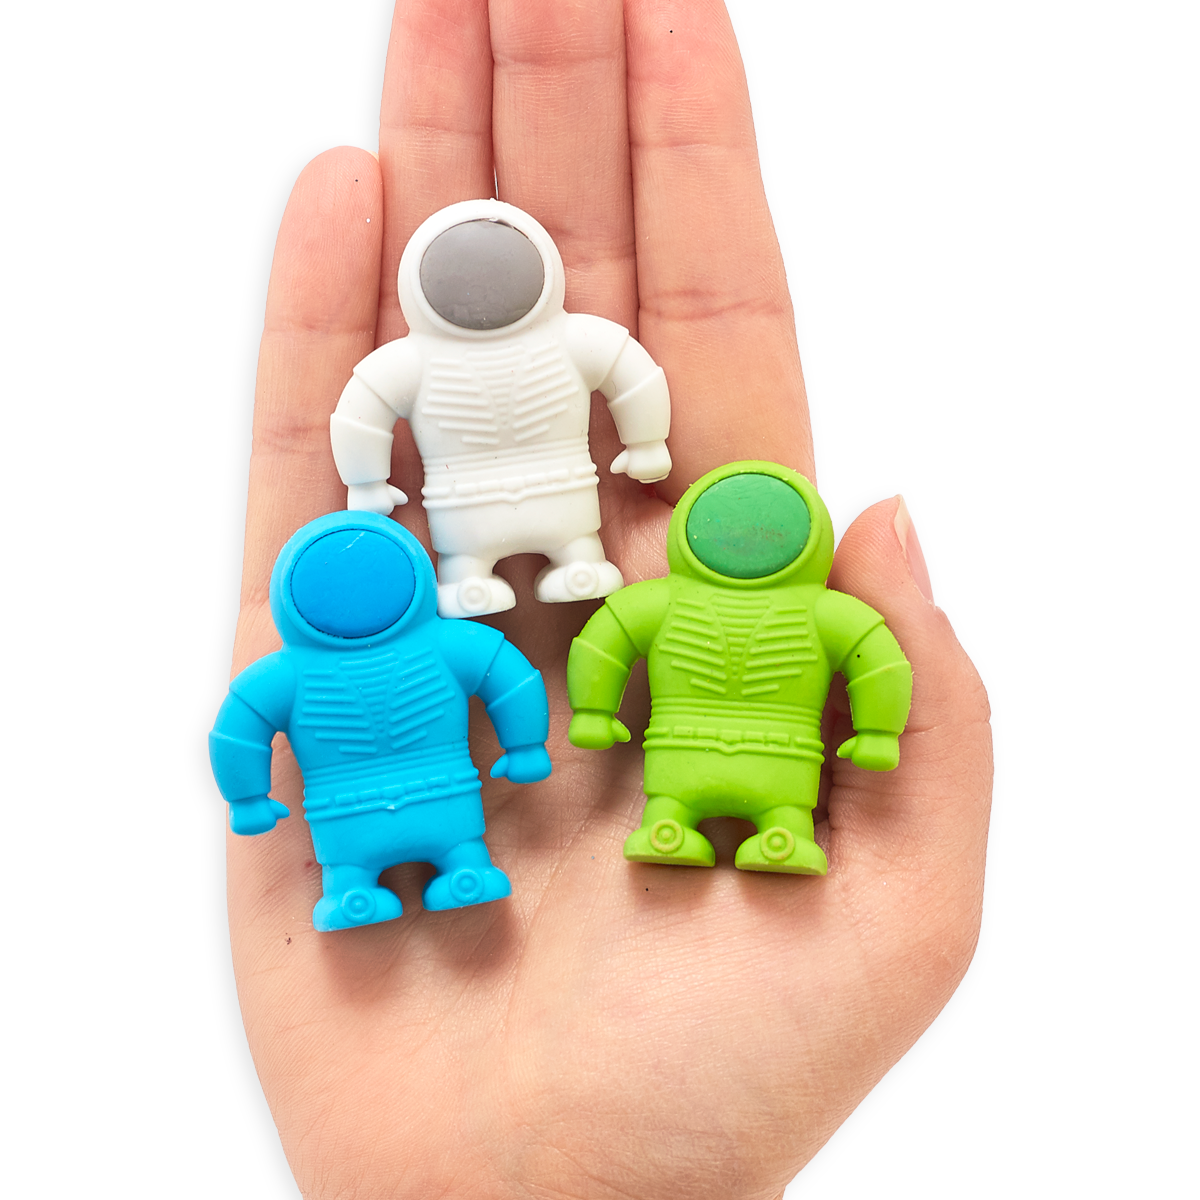 OOLY Astronaut set of 3 erasers out of packaing